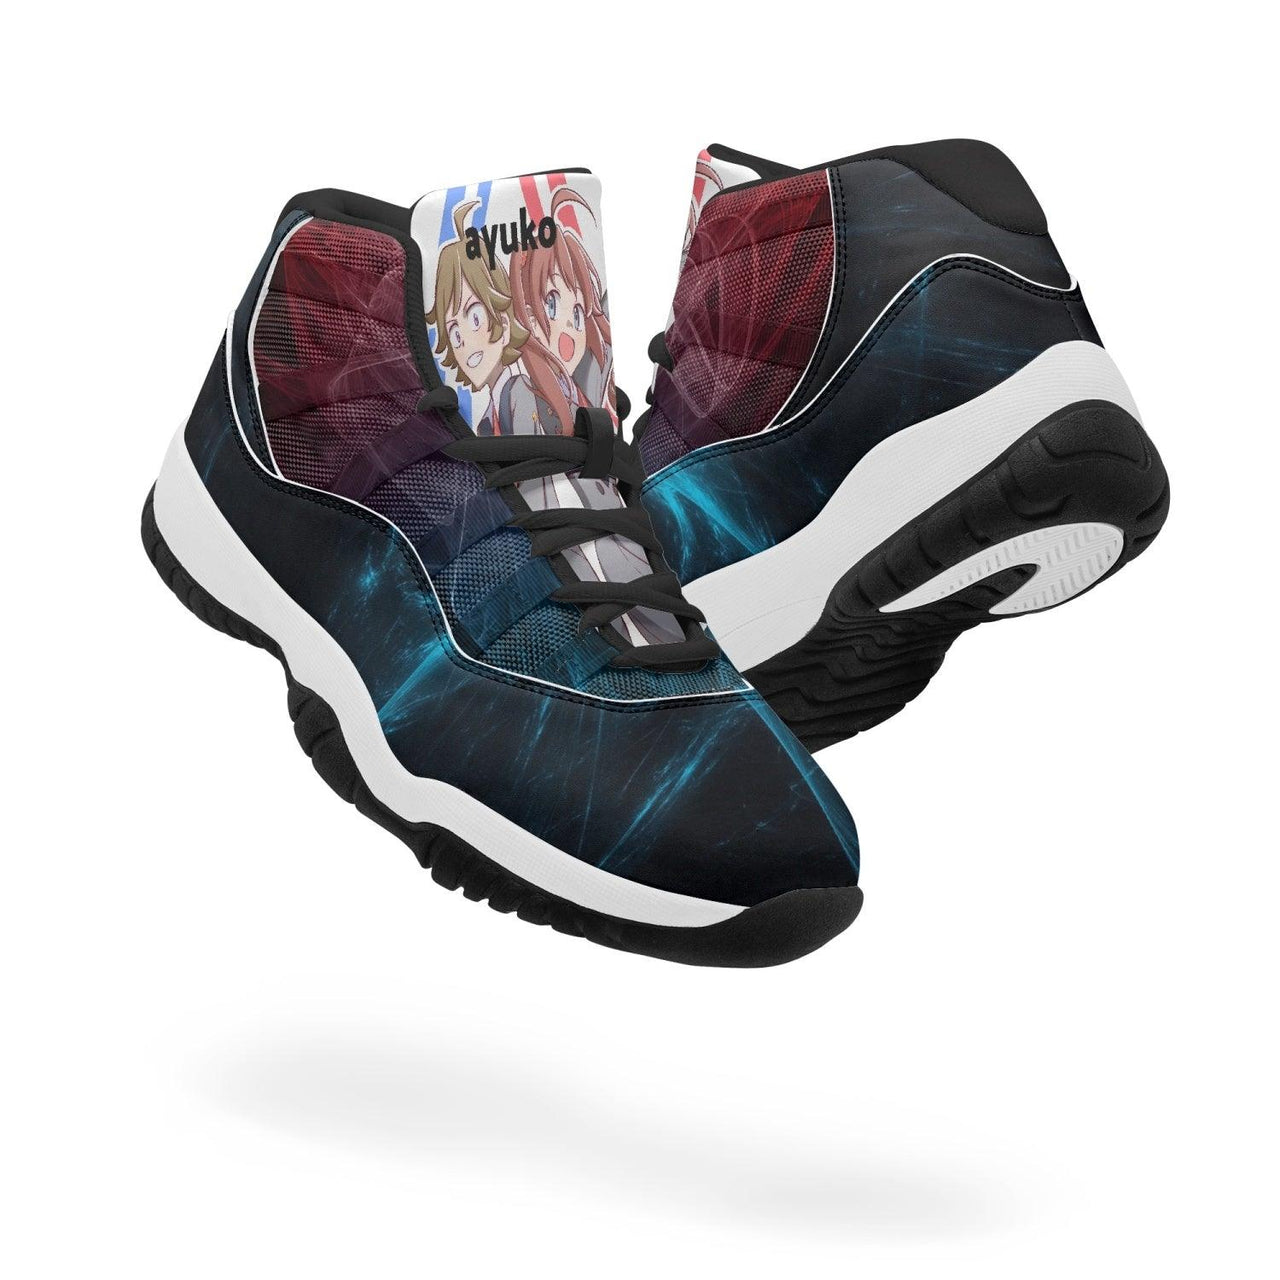 Darling in The Franxx Zorome JD11 Anime Shoes _ Darling in The Franxx _ Ayuko